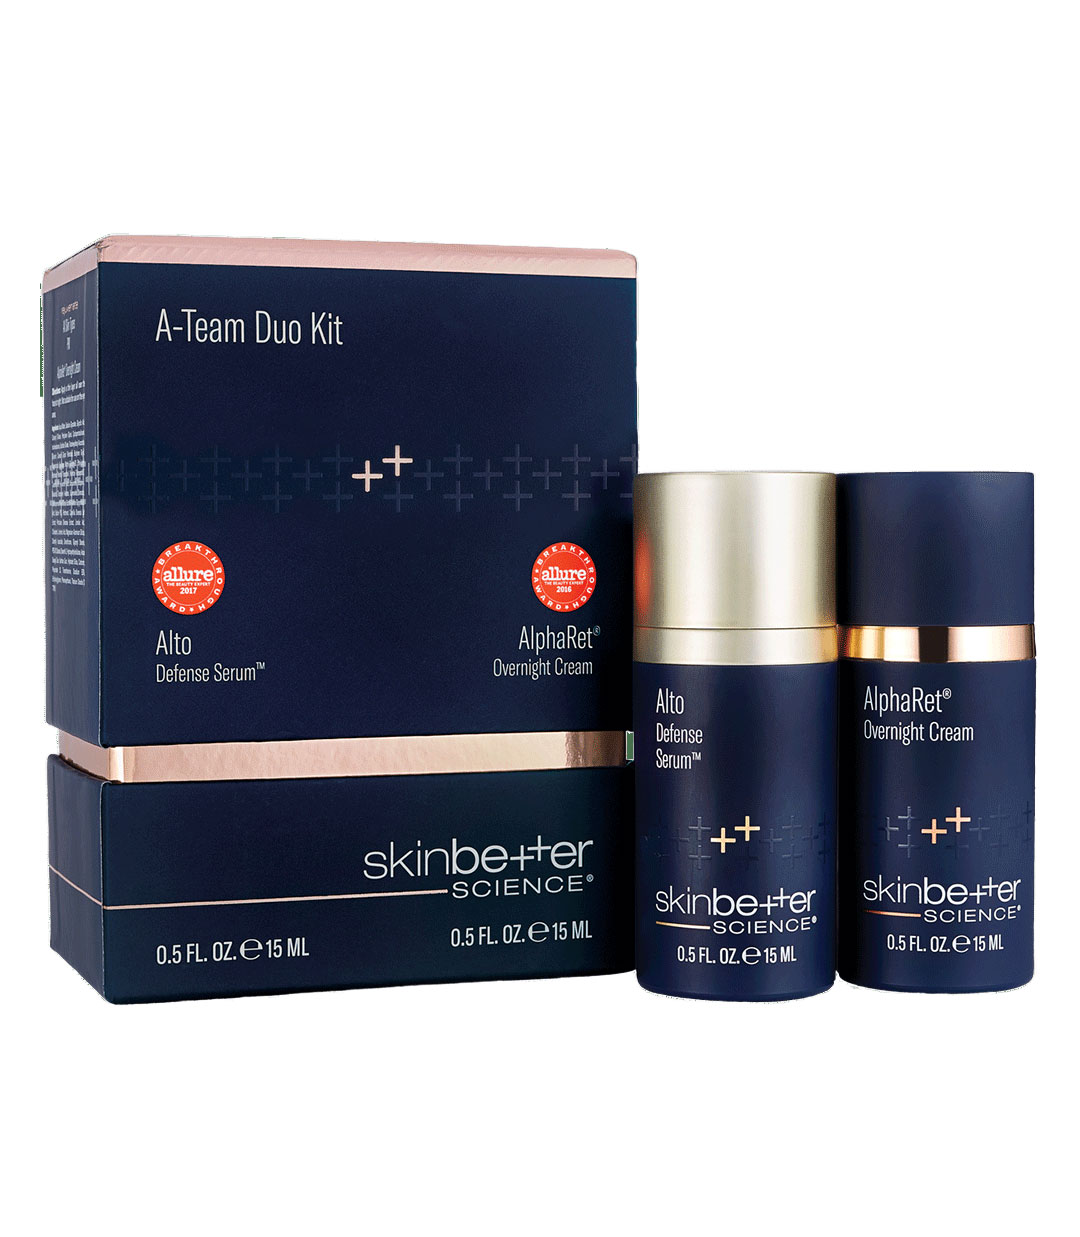 A-Team Duo Kit - Medical Spa